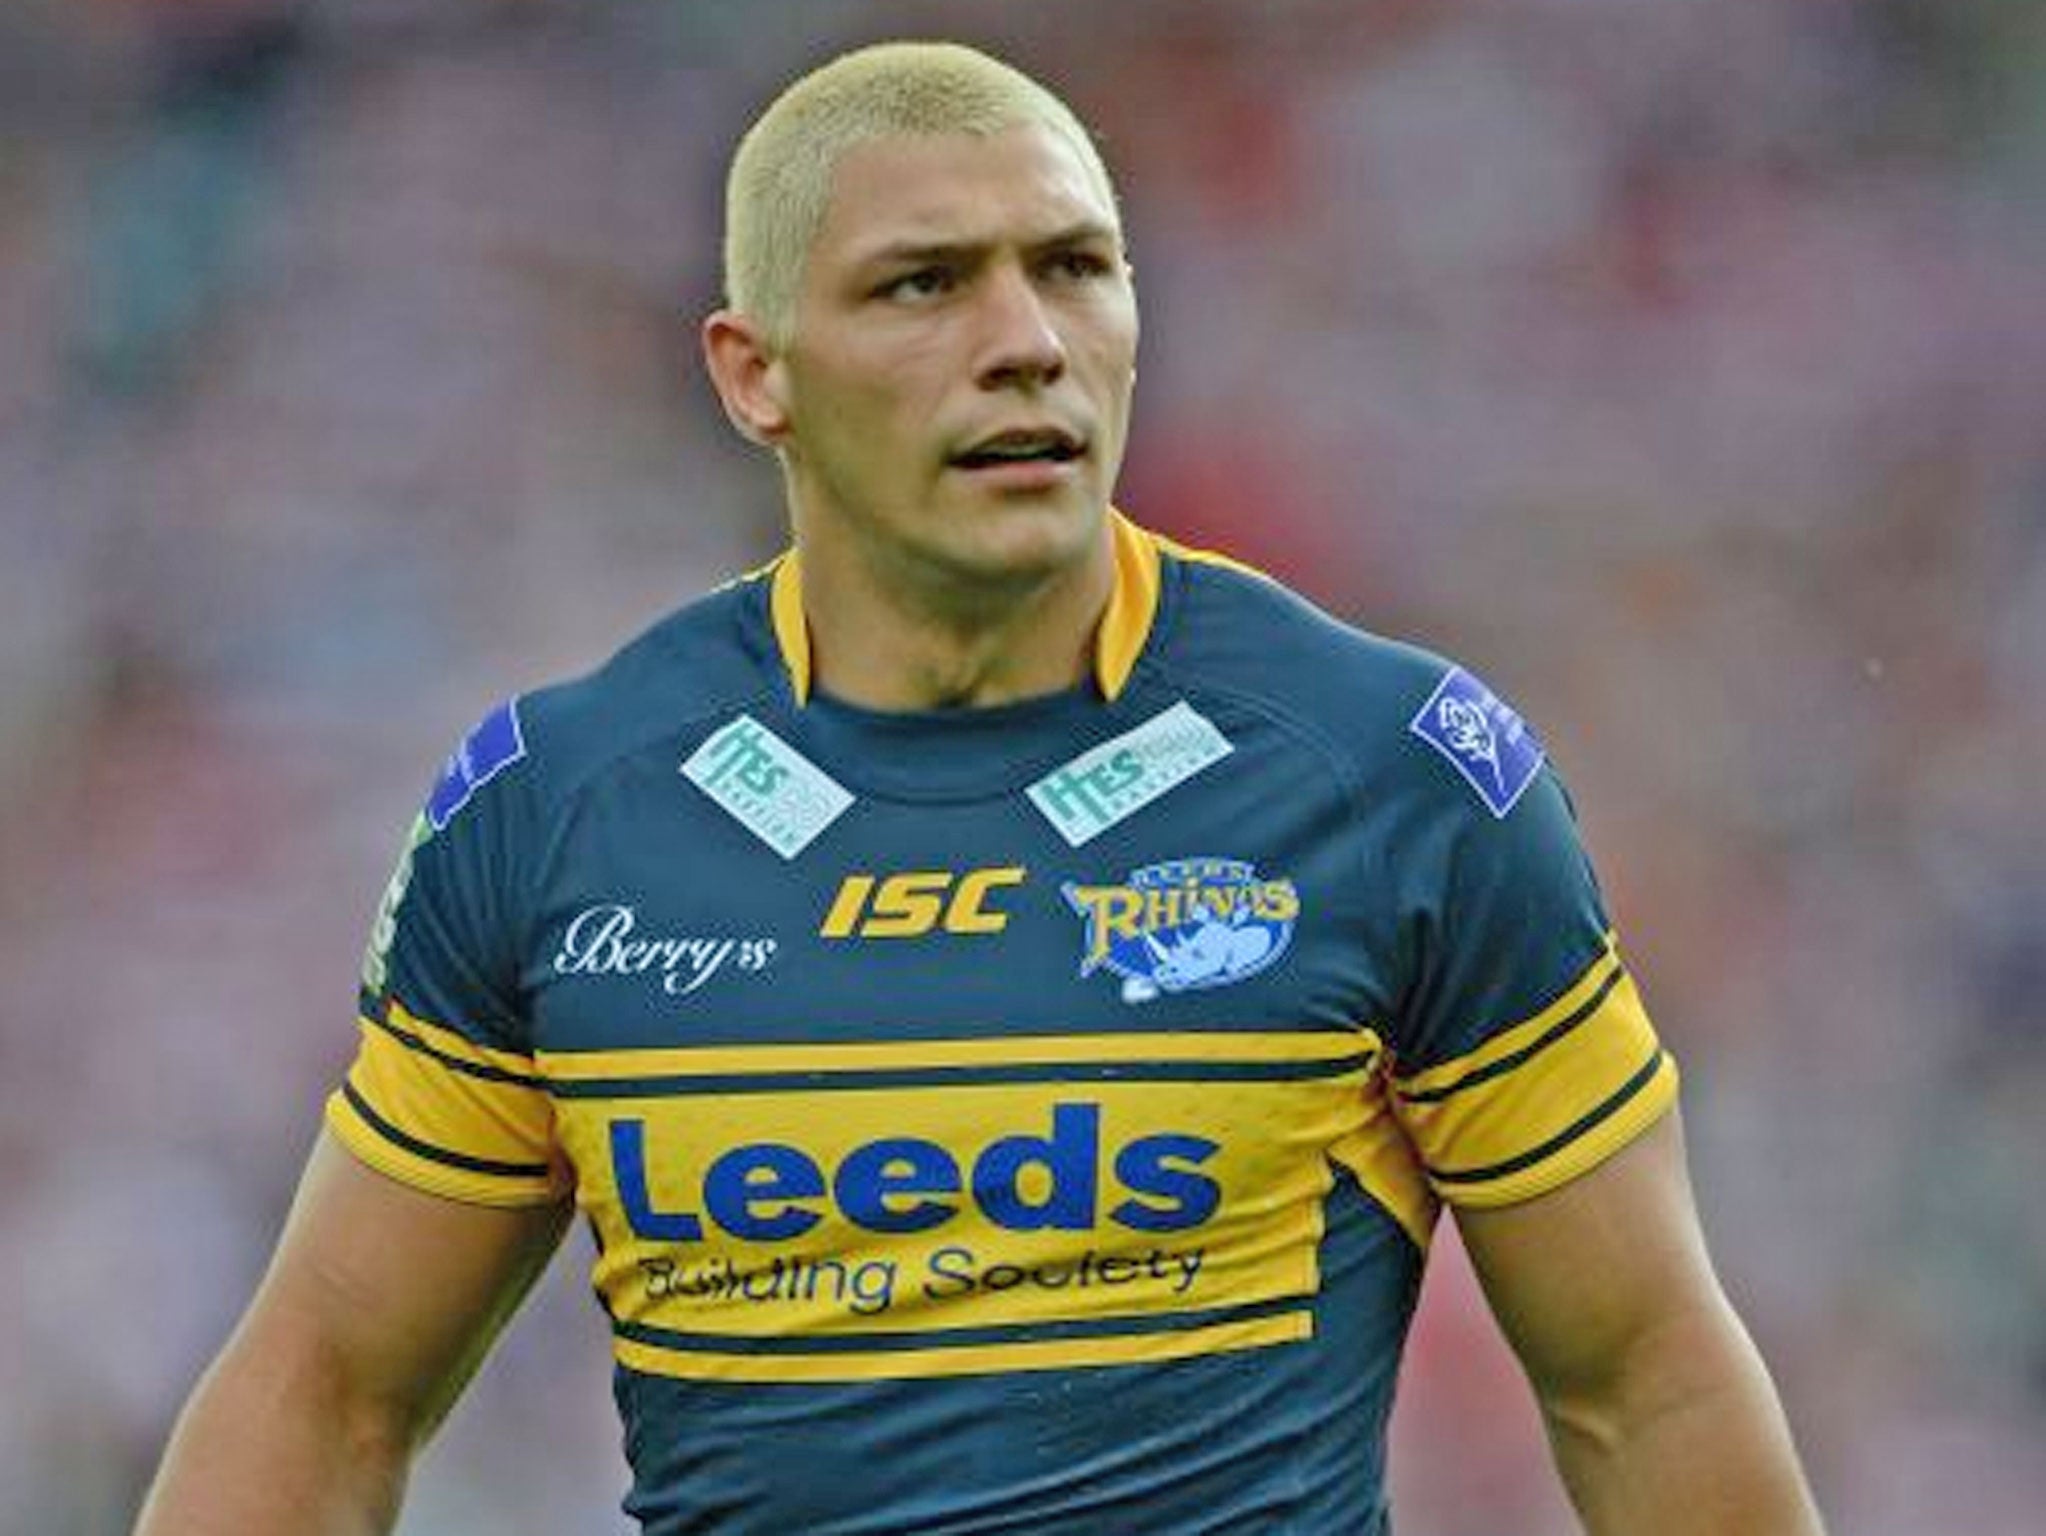 Ryan Hall squeezed in for two touchdowns as Leeds won 28-22